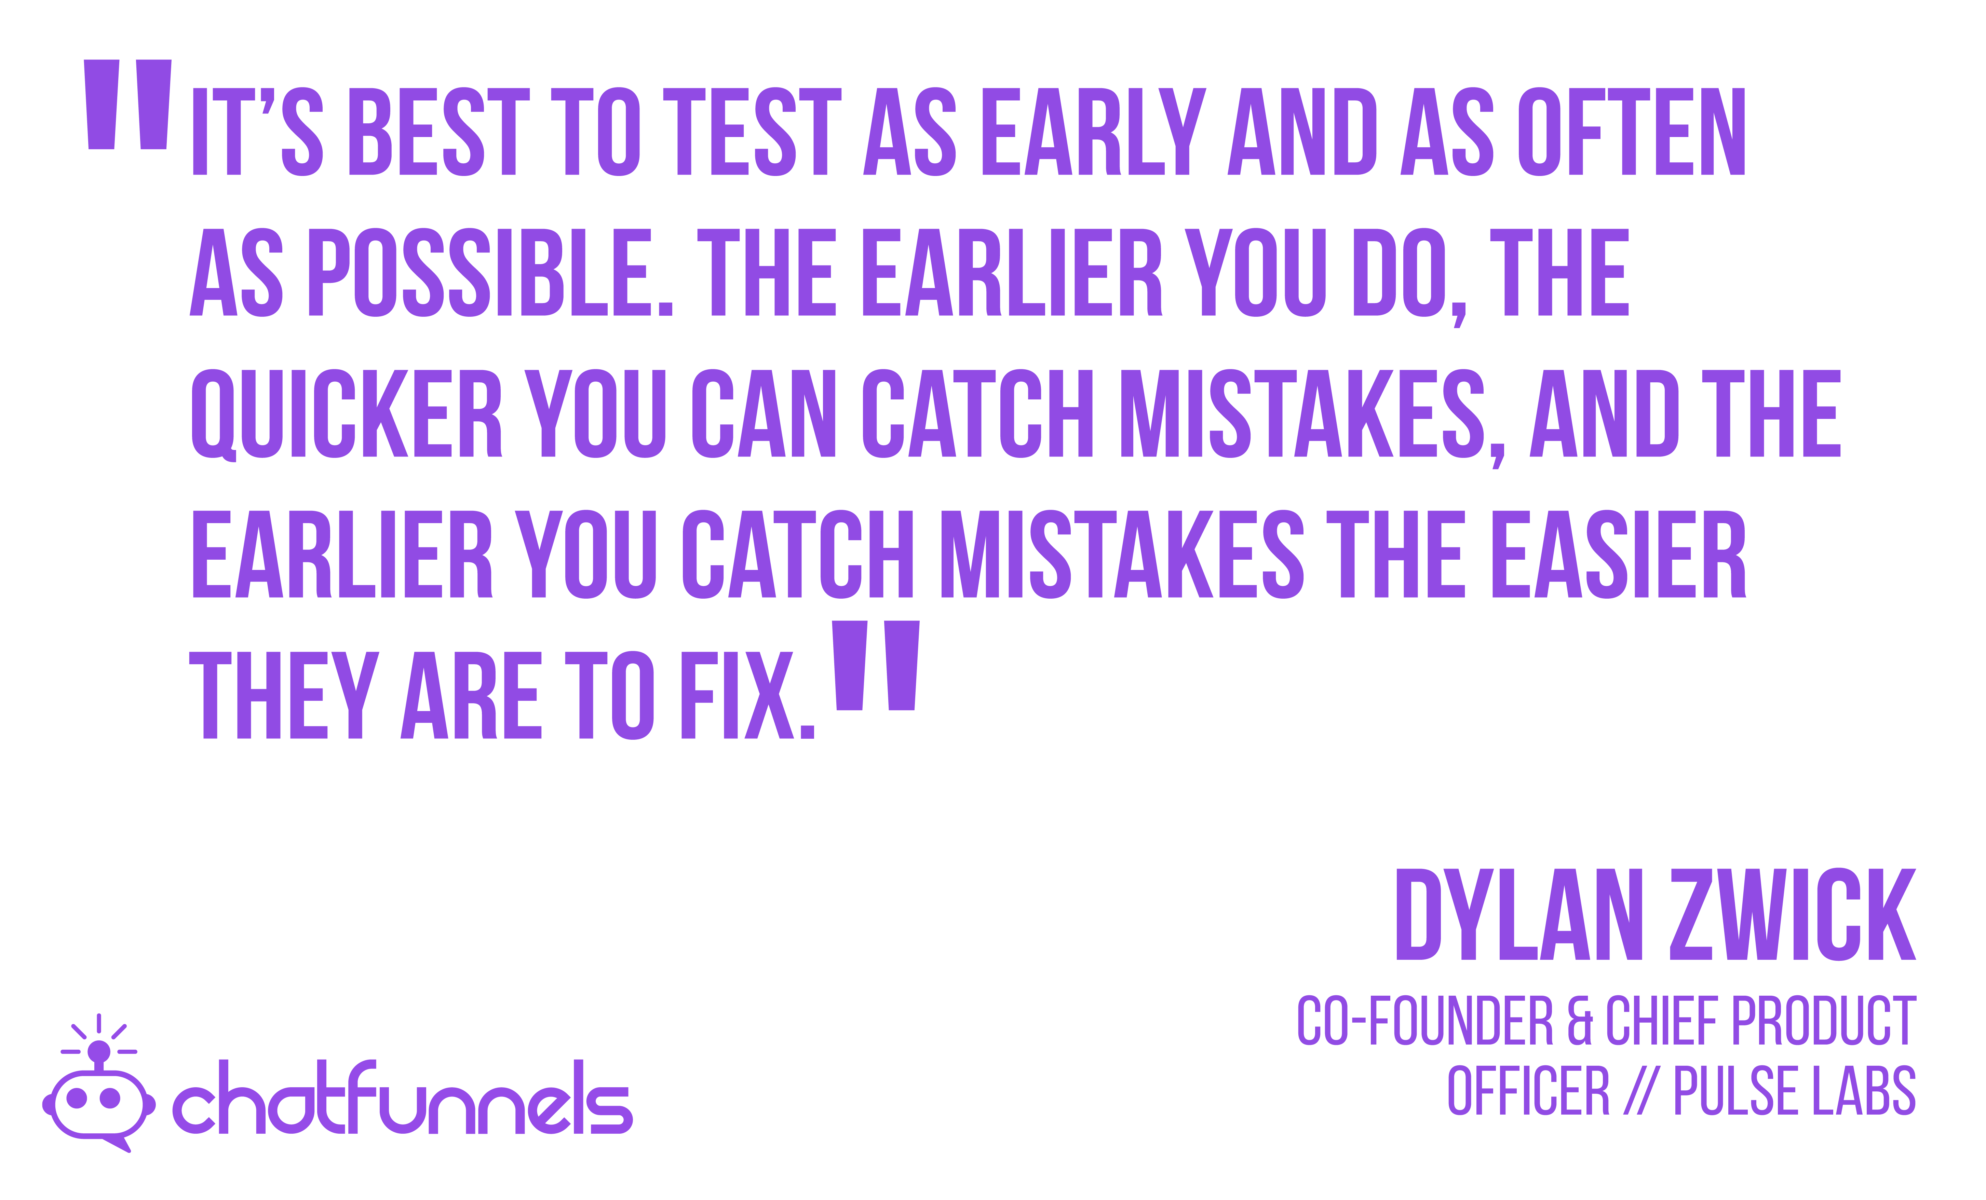 It's best to test as early and as often as possible. The earlier you do, the quicker you can catch mistakes and the earlier you catch mistakes the easier they are to fix.